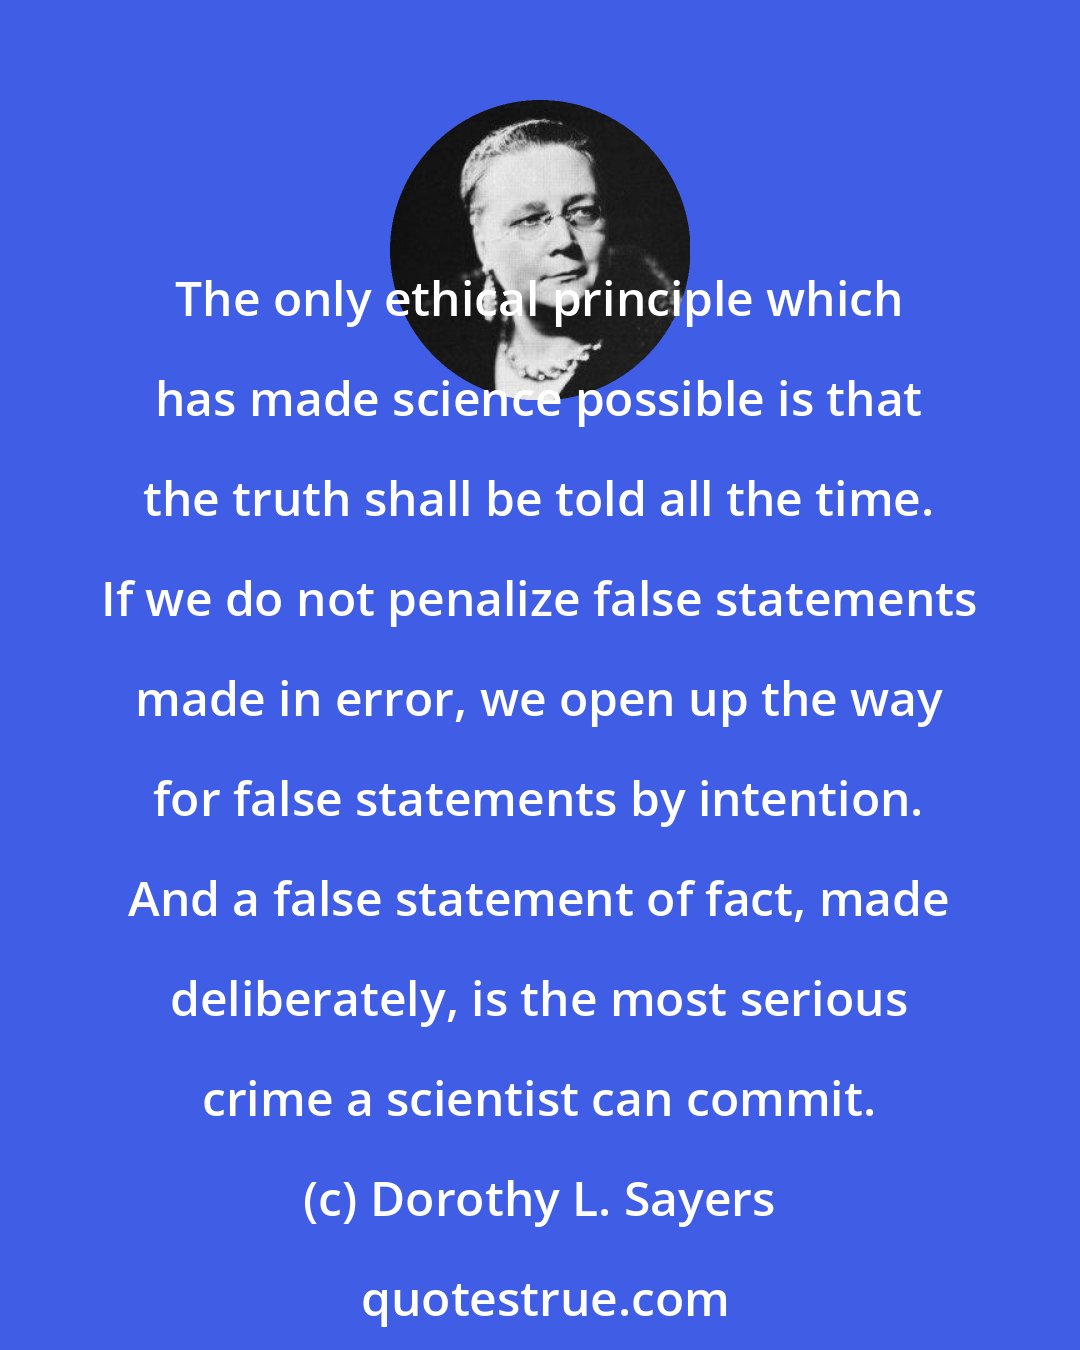 Dorothy L. Sayers: The only ethical principle which has made science possible is that the truth shall be told all the time. If we do not penalize false statements made in error, we open up the way for false statements by intention. And a false statement of fact, made deliberately, is the most serious crime a scientist can commit.